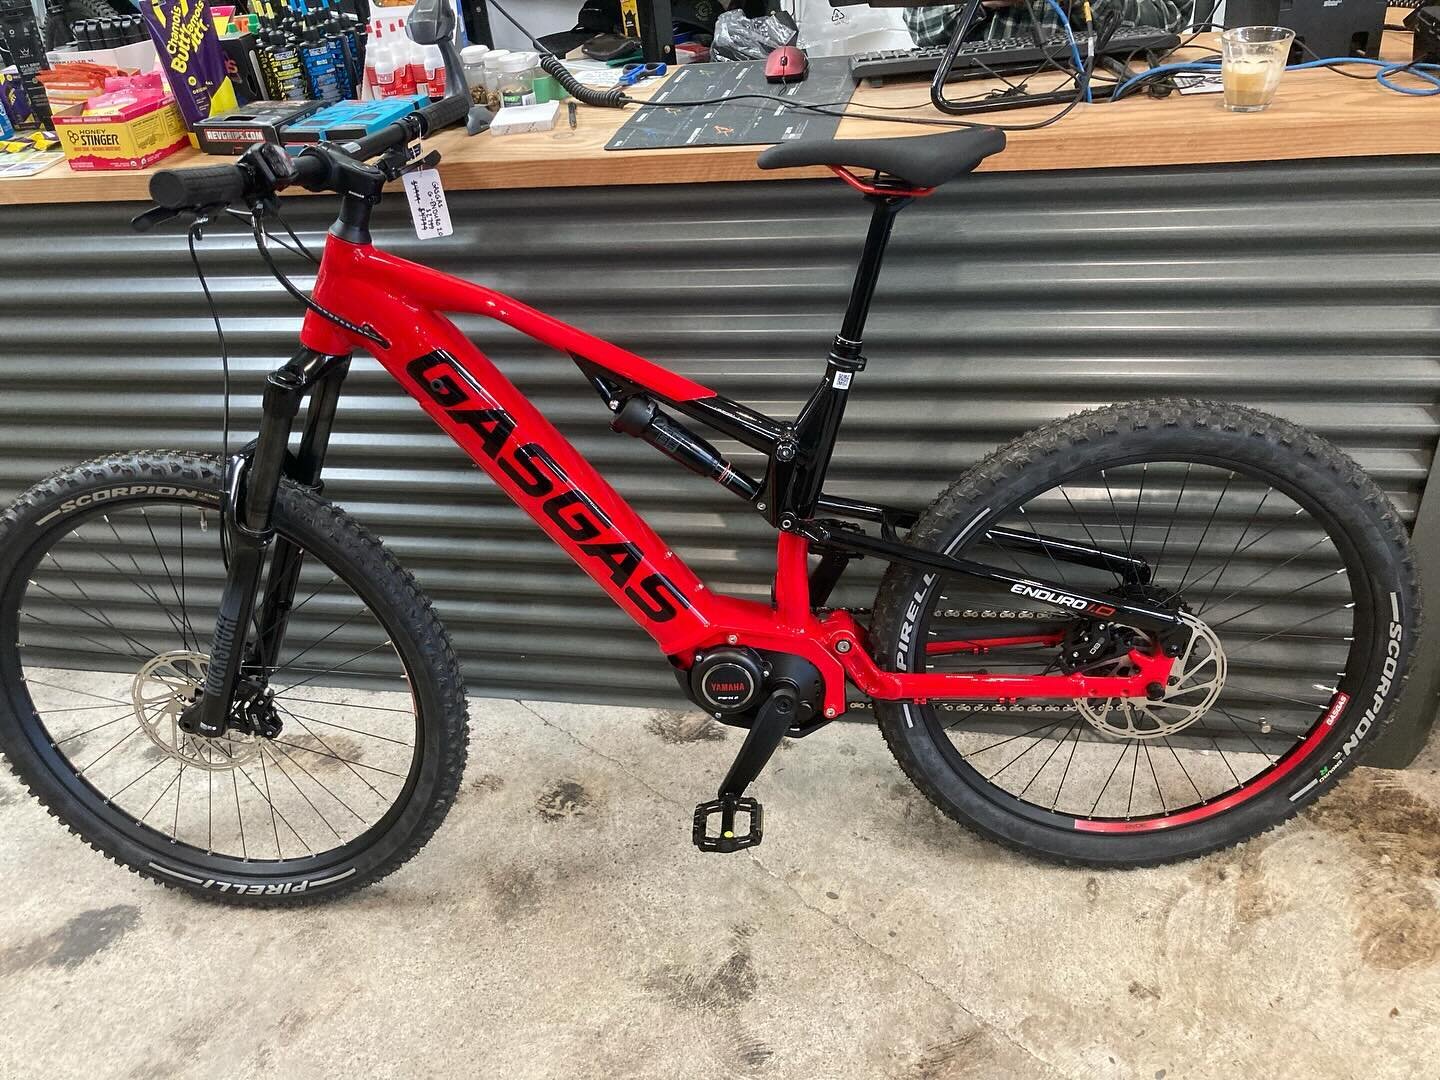 Amazing deals on GasGas and Husqvarna e-bikes at both locations including this full suspension G-Enduro 1.0 electric mountain bike for $2799 plus tax!